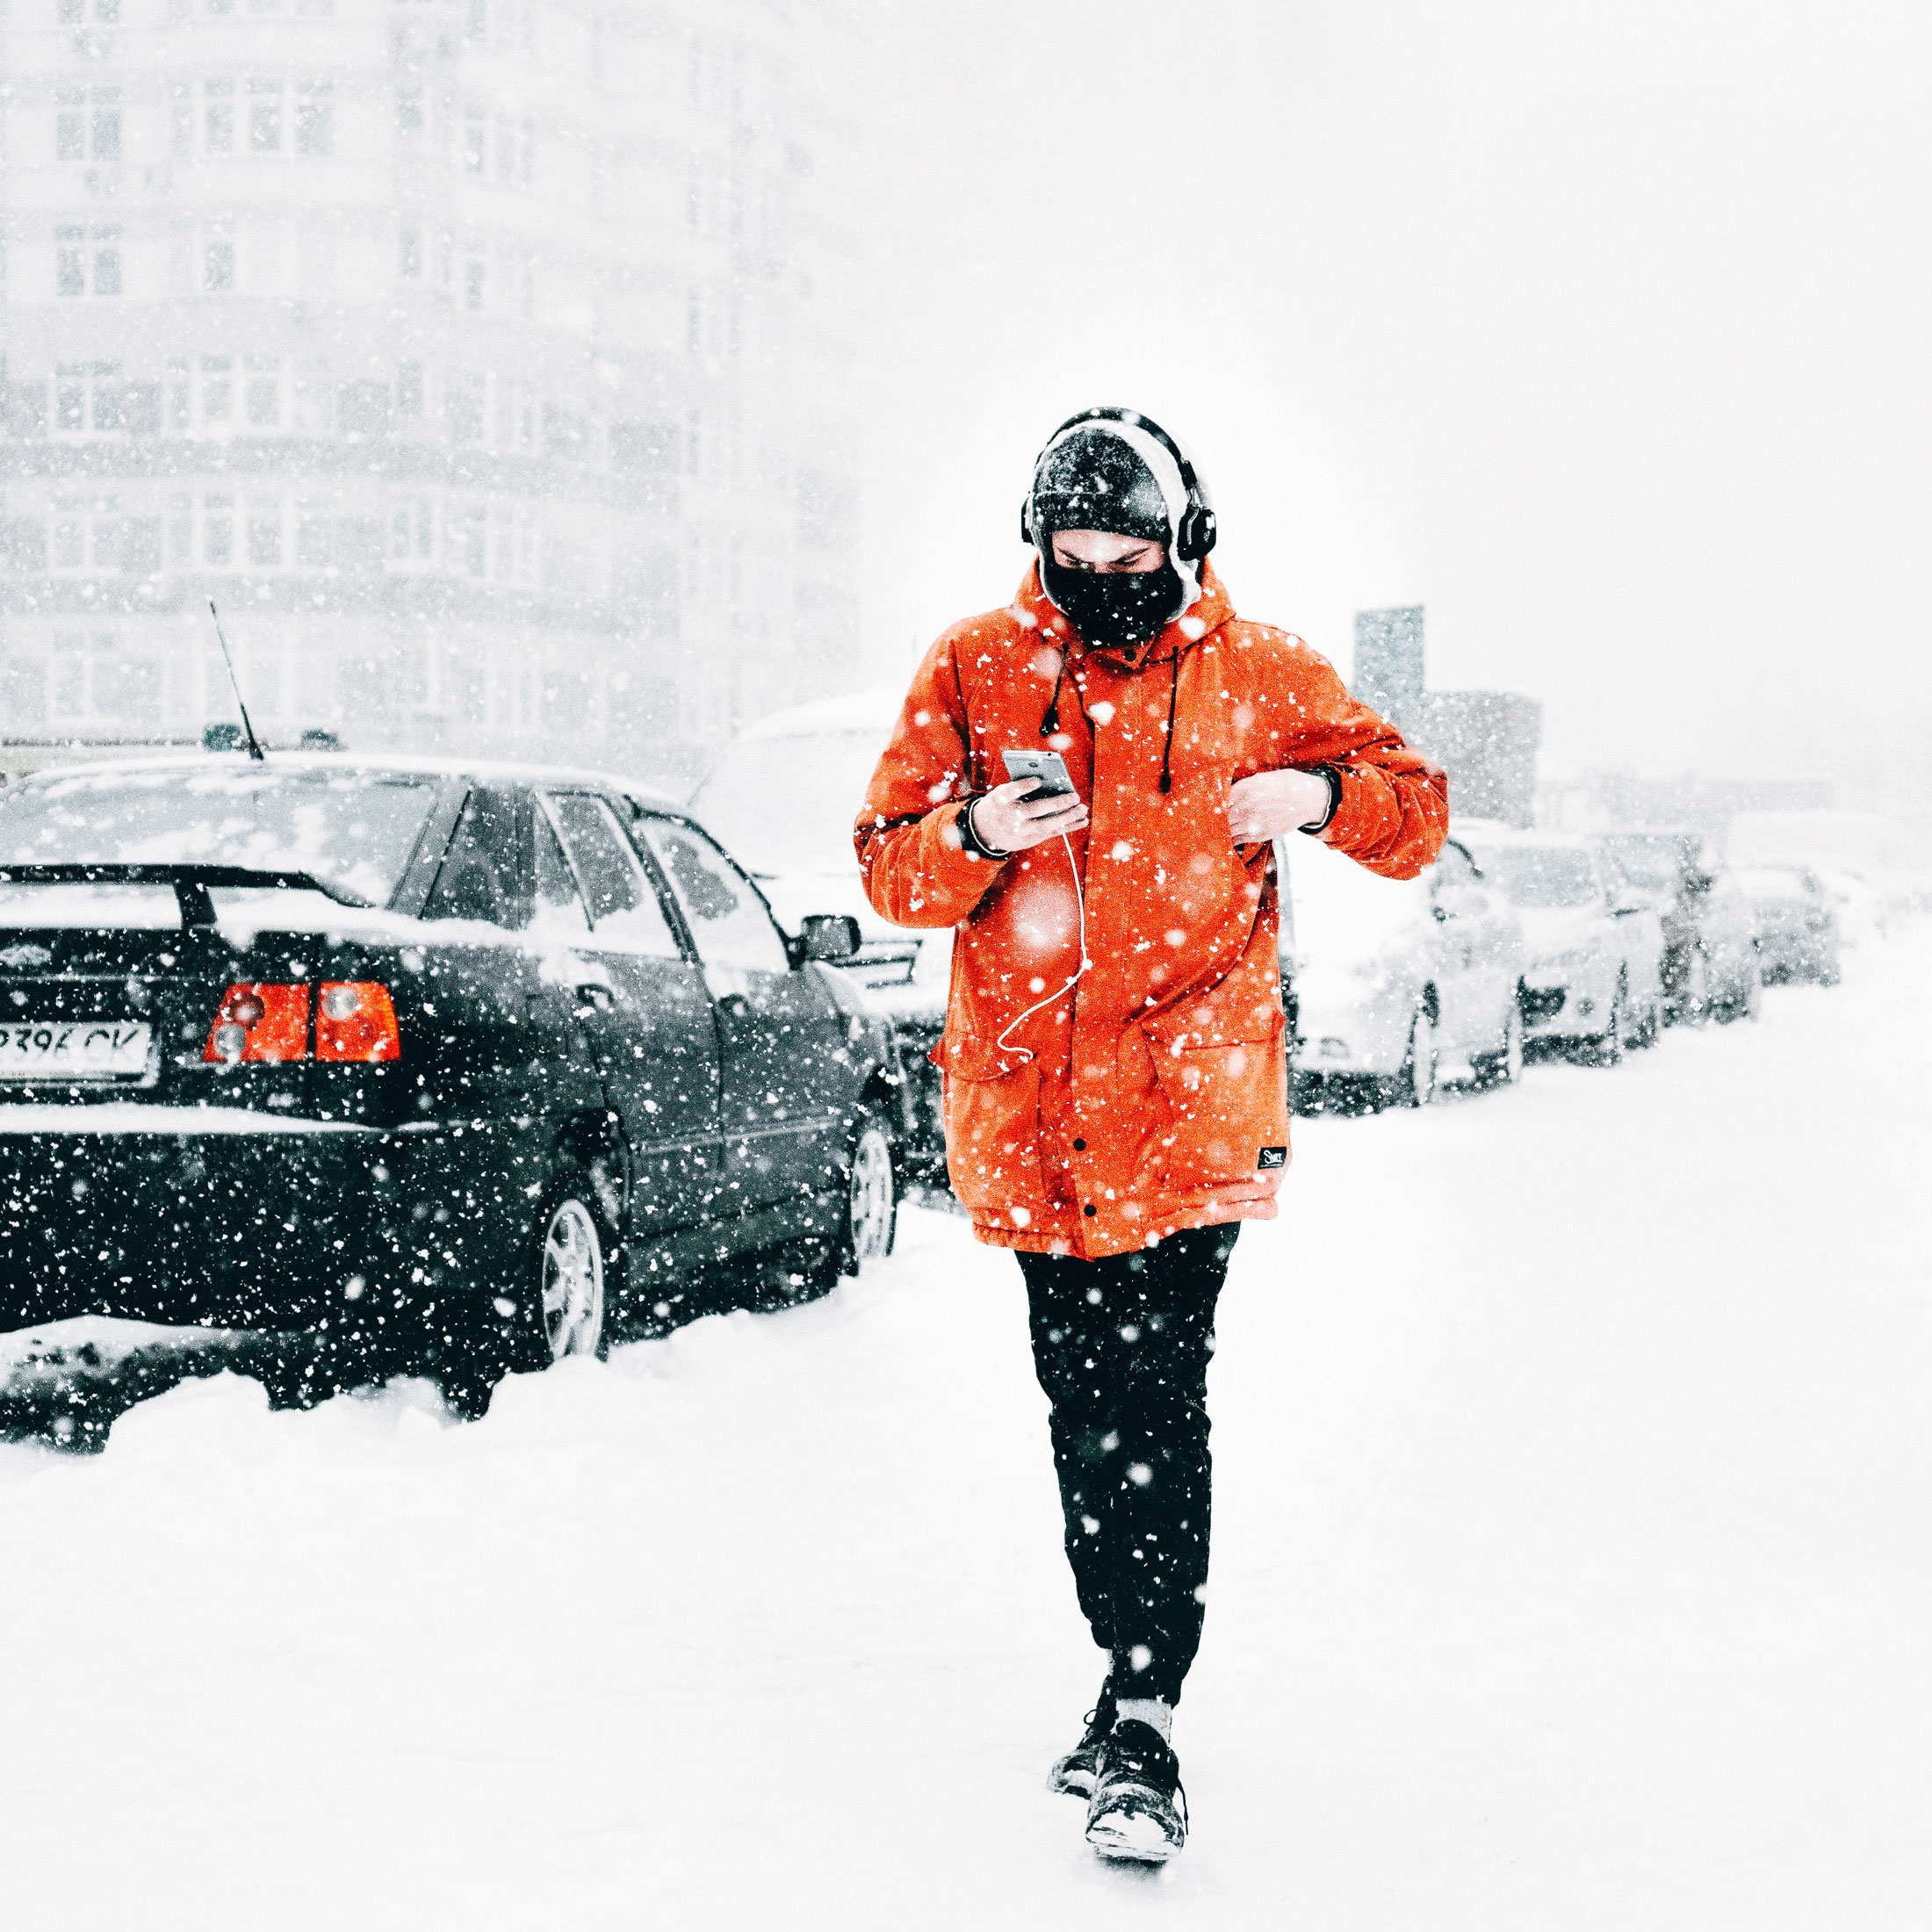 Man walking along a snow-covered pavement on the right. On the left are a line of cars that are also covered by snow. He is wearing a bright orange coat, and holding his iPhone listening to music.